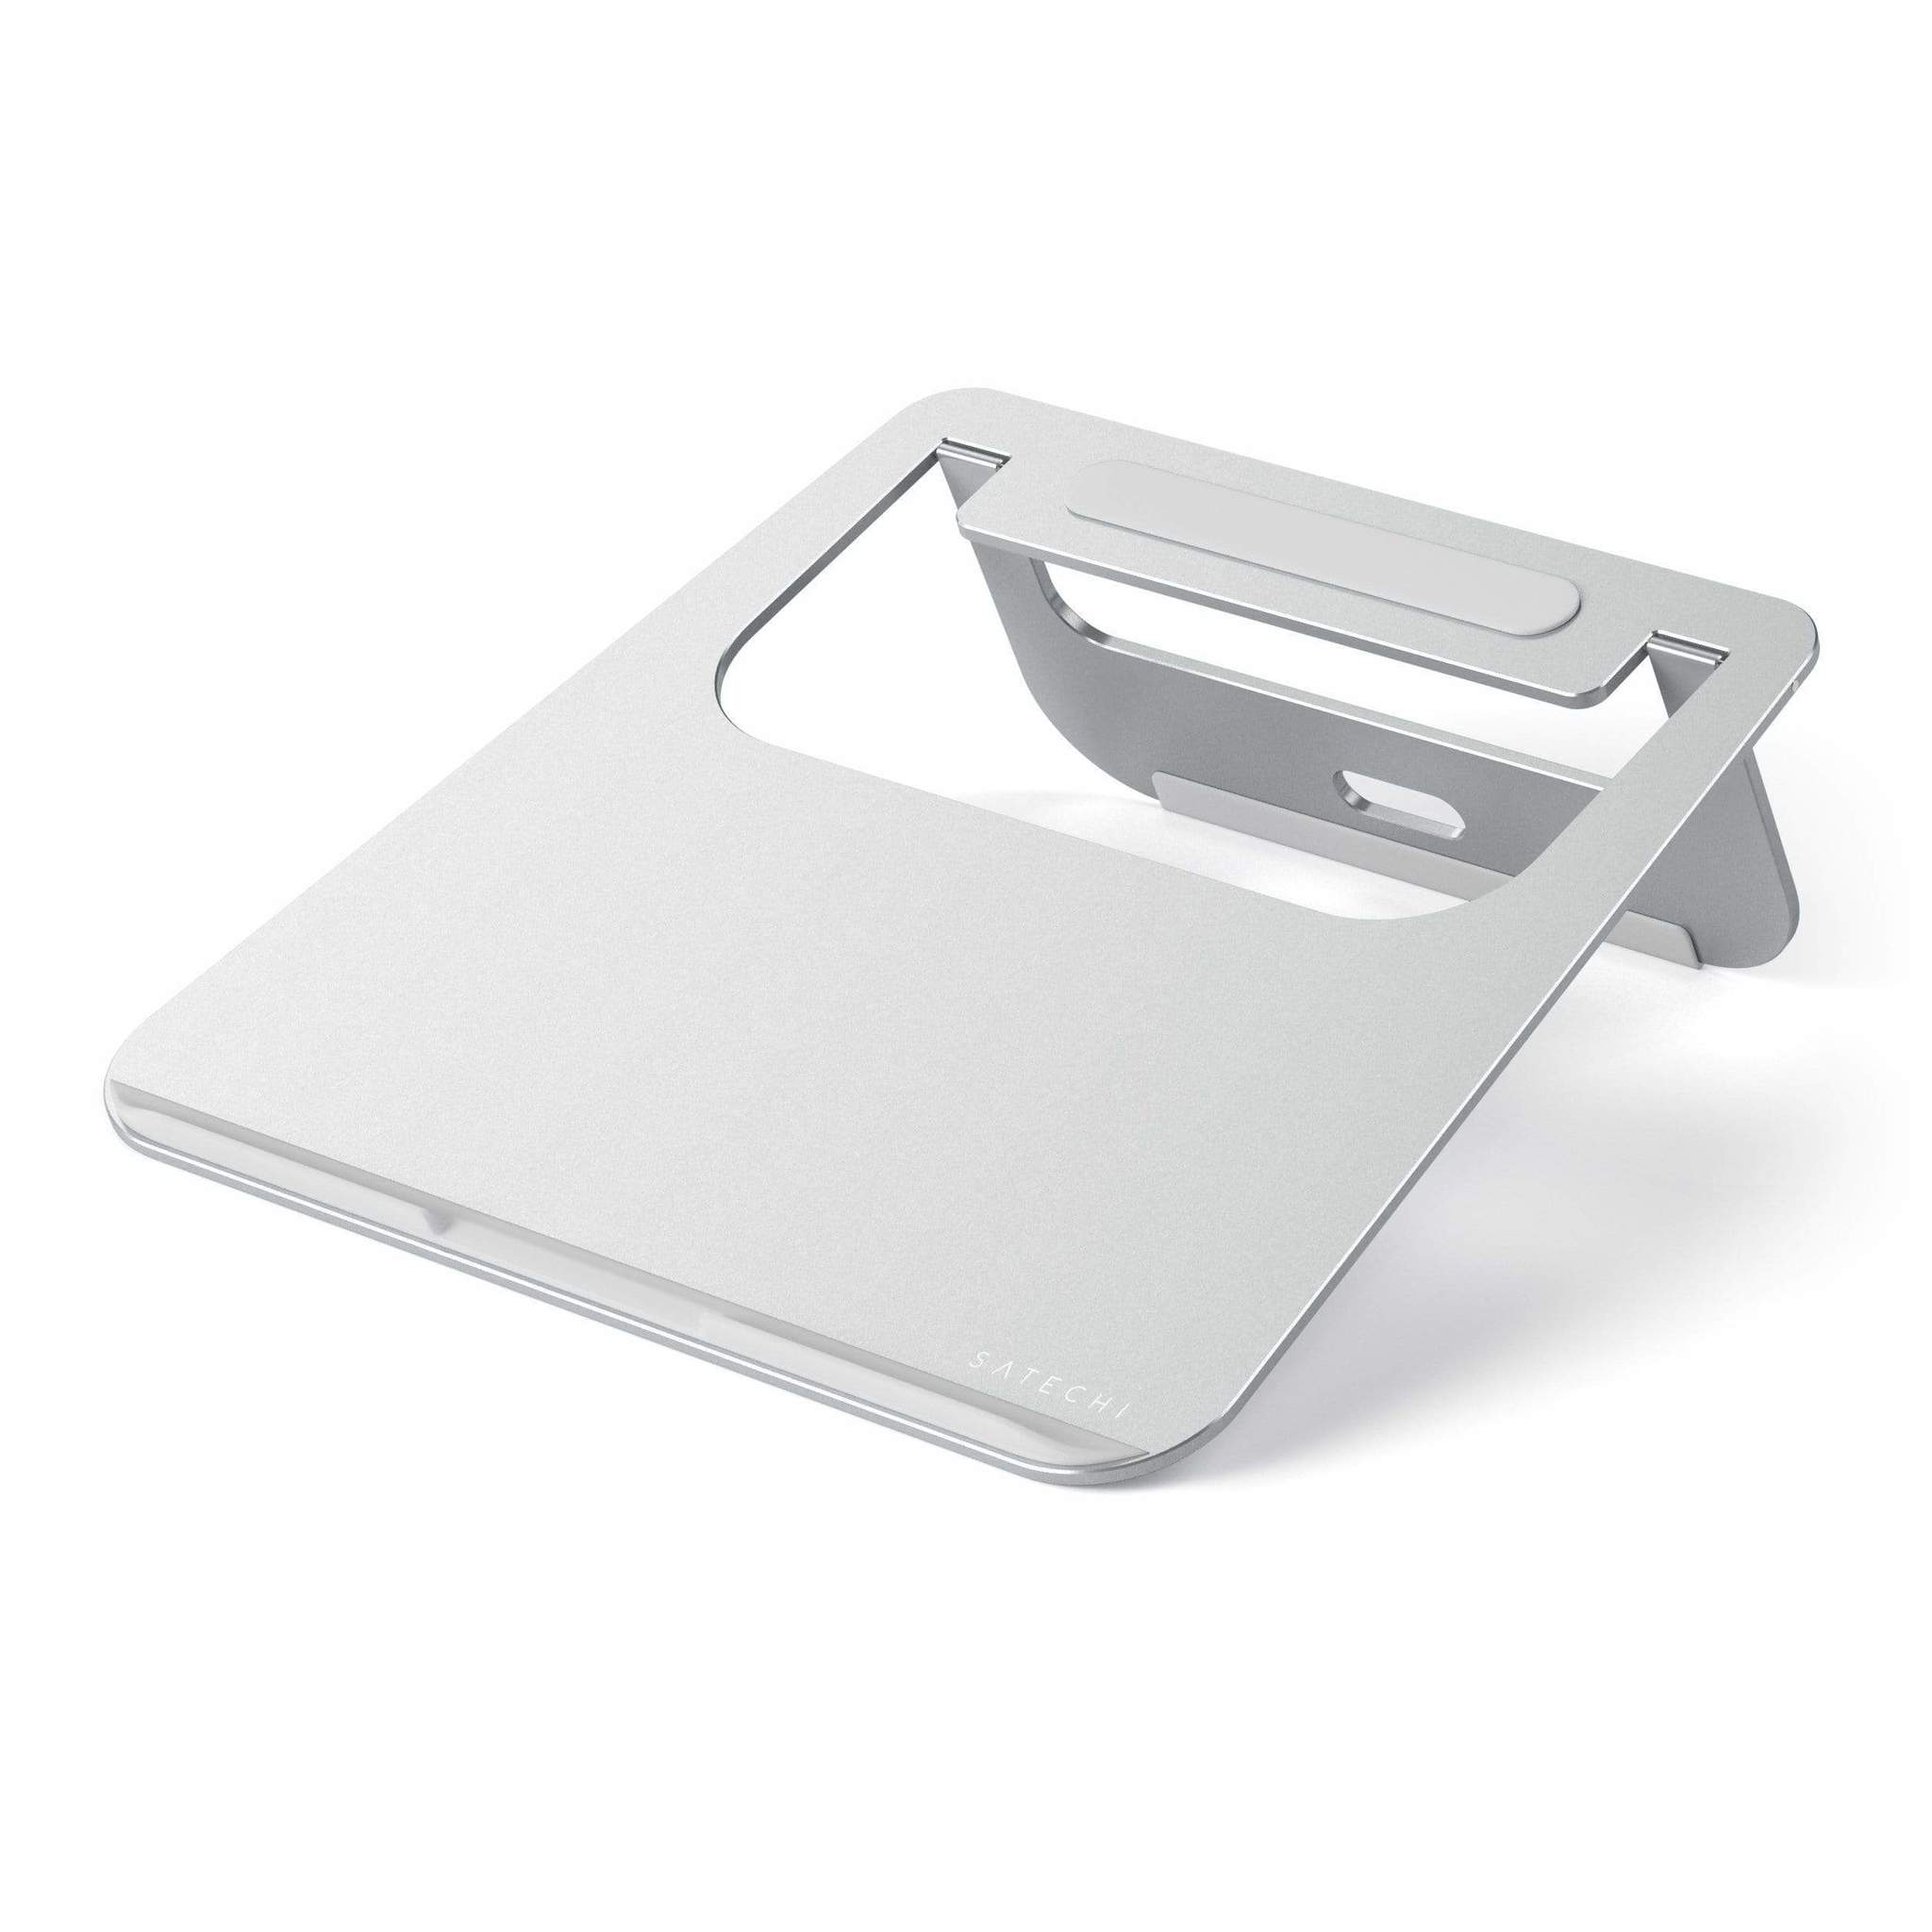 SATECHI ST-AFSM ALUMINUM FOLDABLE STAND